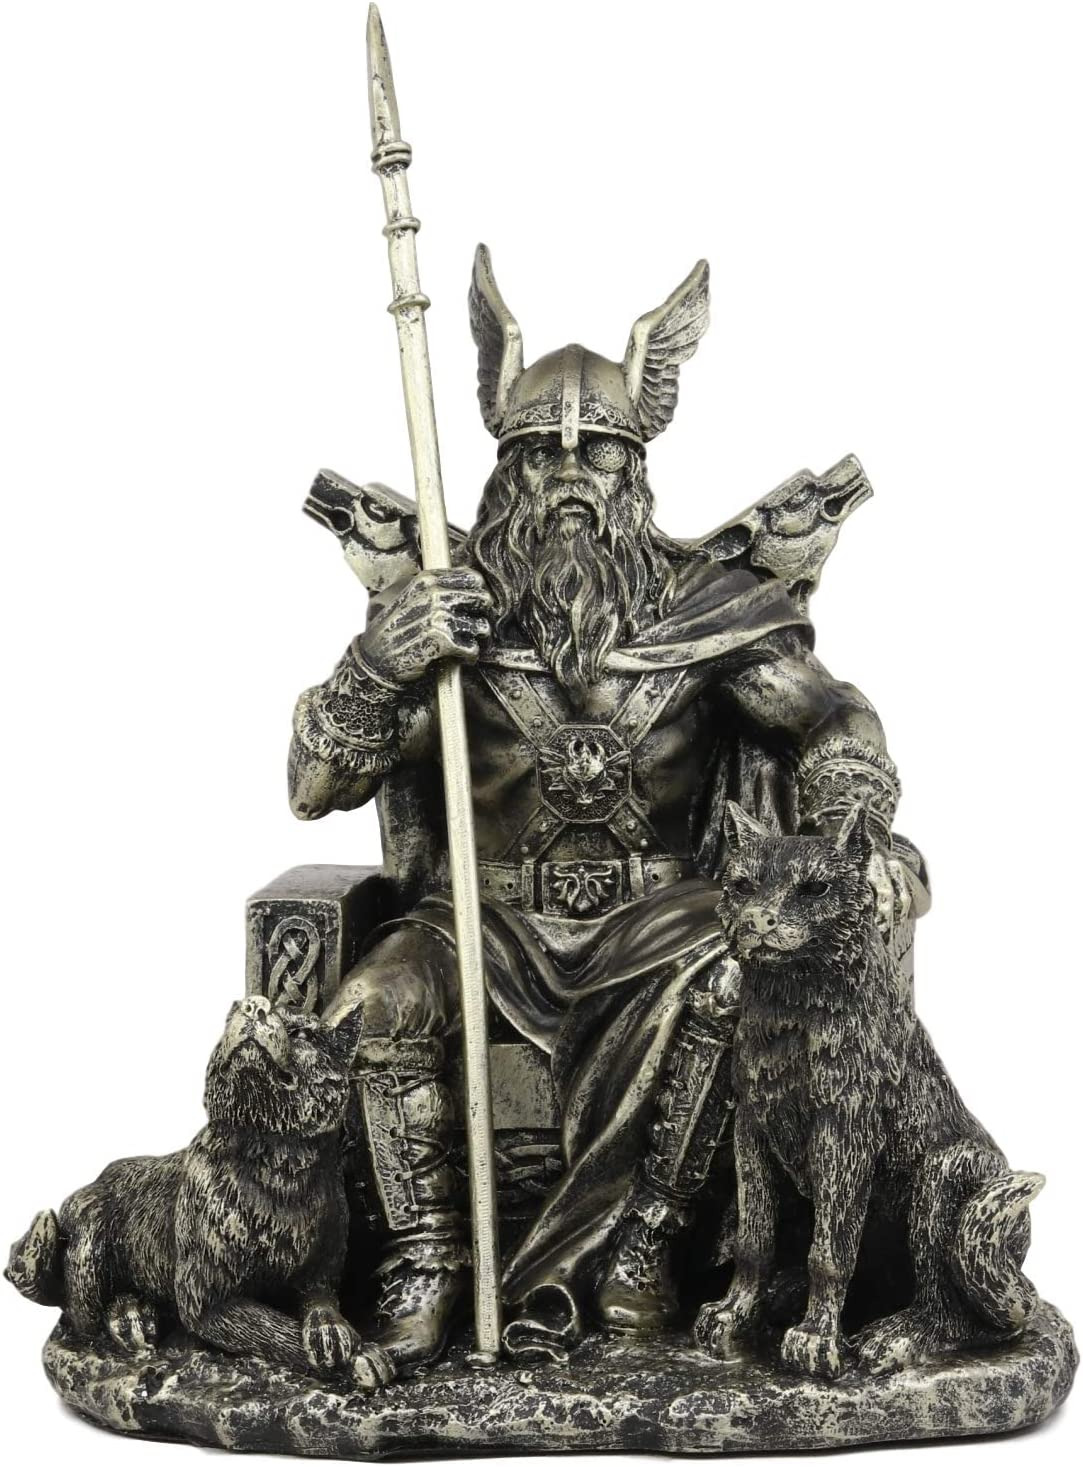 Norse Viking Mythology Odin the Alfather Sitting on a Throne with Two Wolf Dogs 